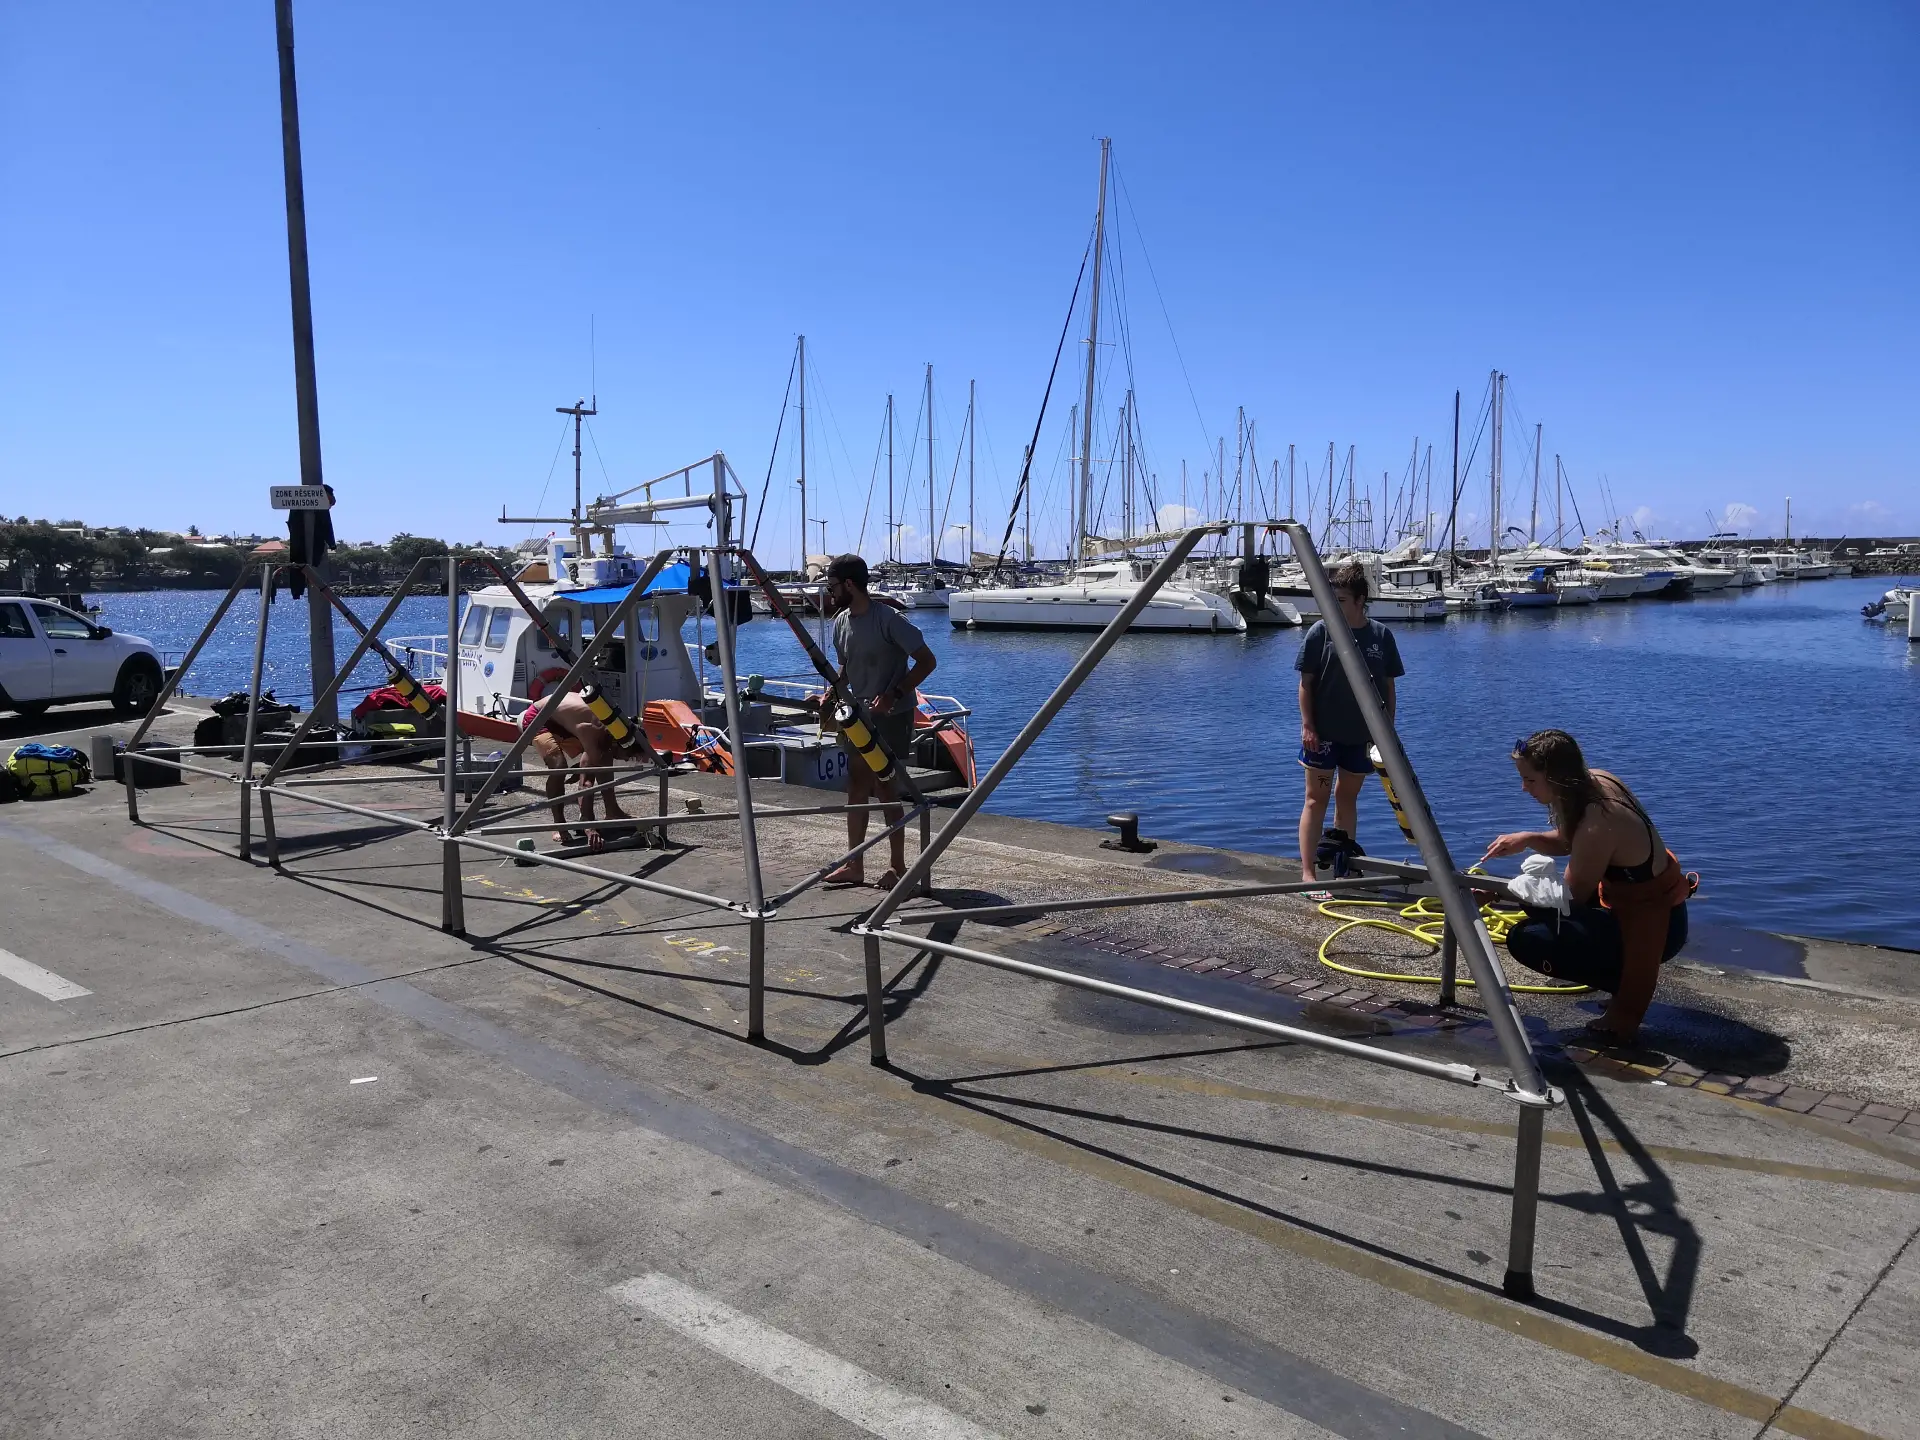 Dismantling of tripods on the port